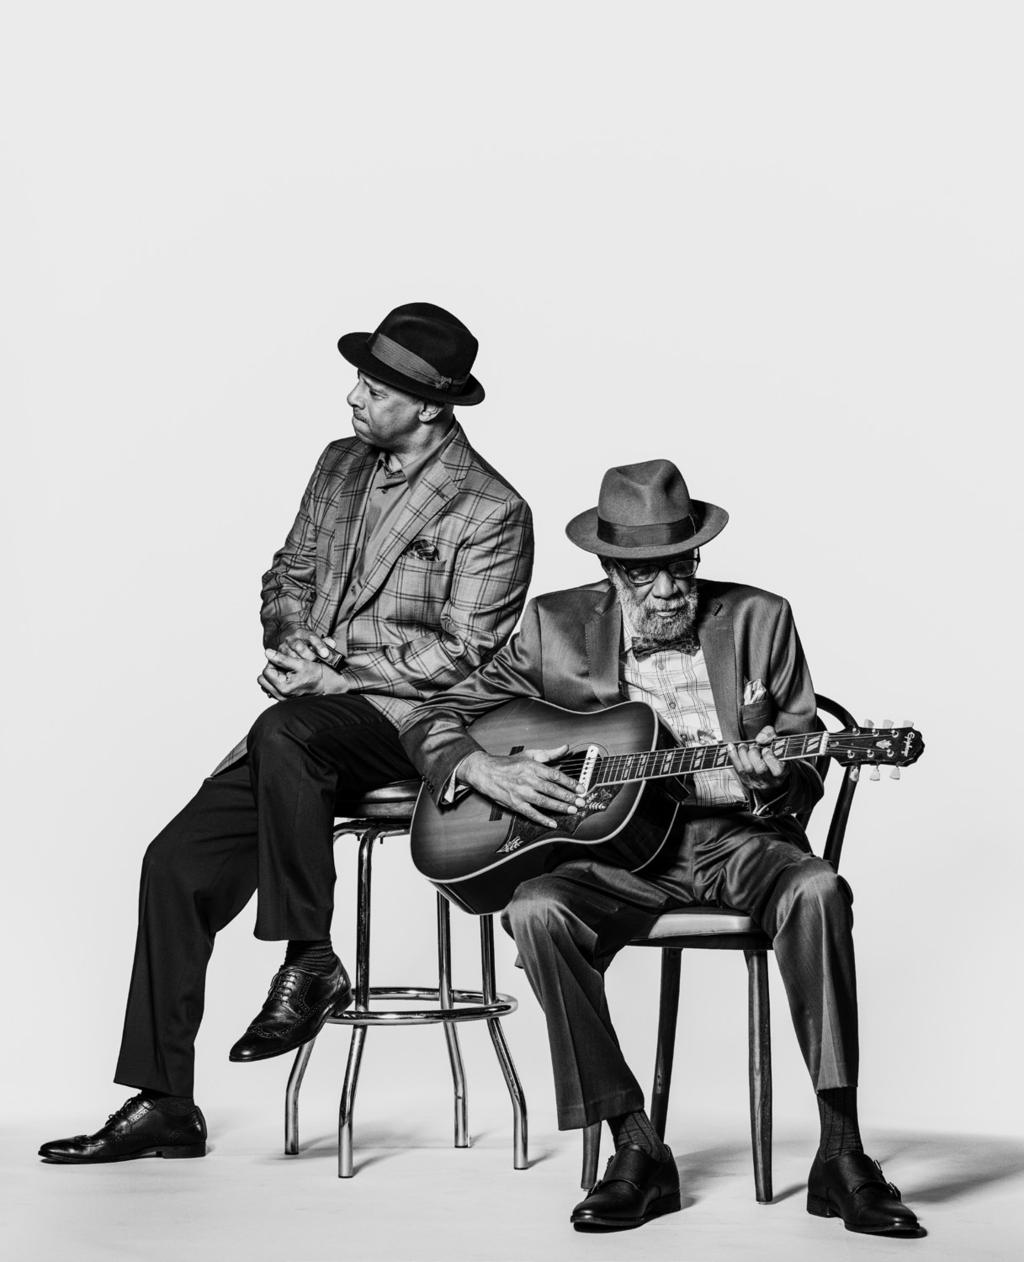 In Memoriam Lackawanna Blues is dedicated to the memory of Bill Sims Jr. (1949 2019) L-R: Ruben Santiago-Hudson and Bill Sims Jr. Photo by Benedict Evans.